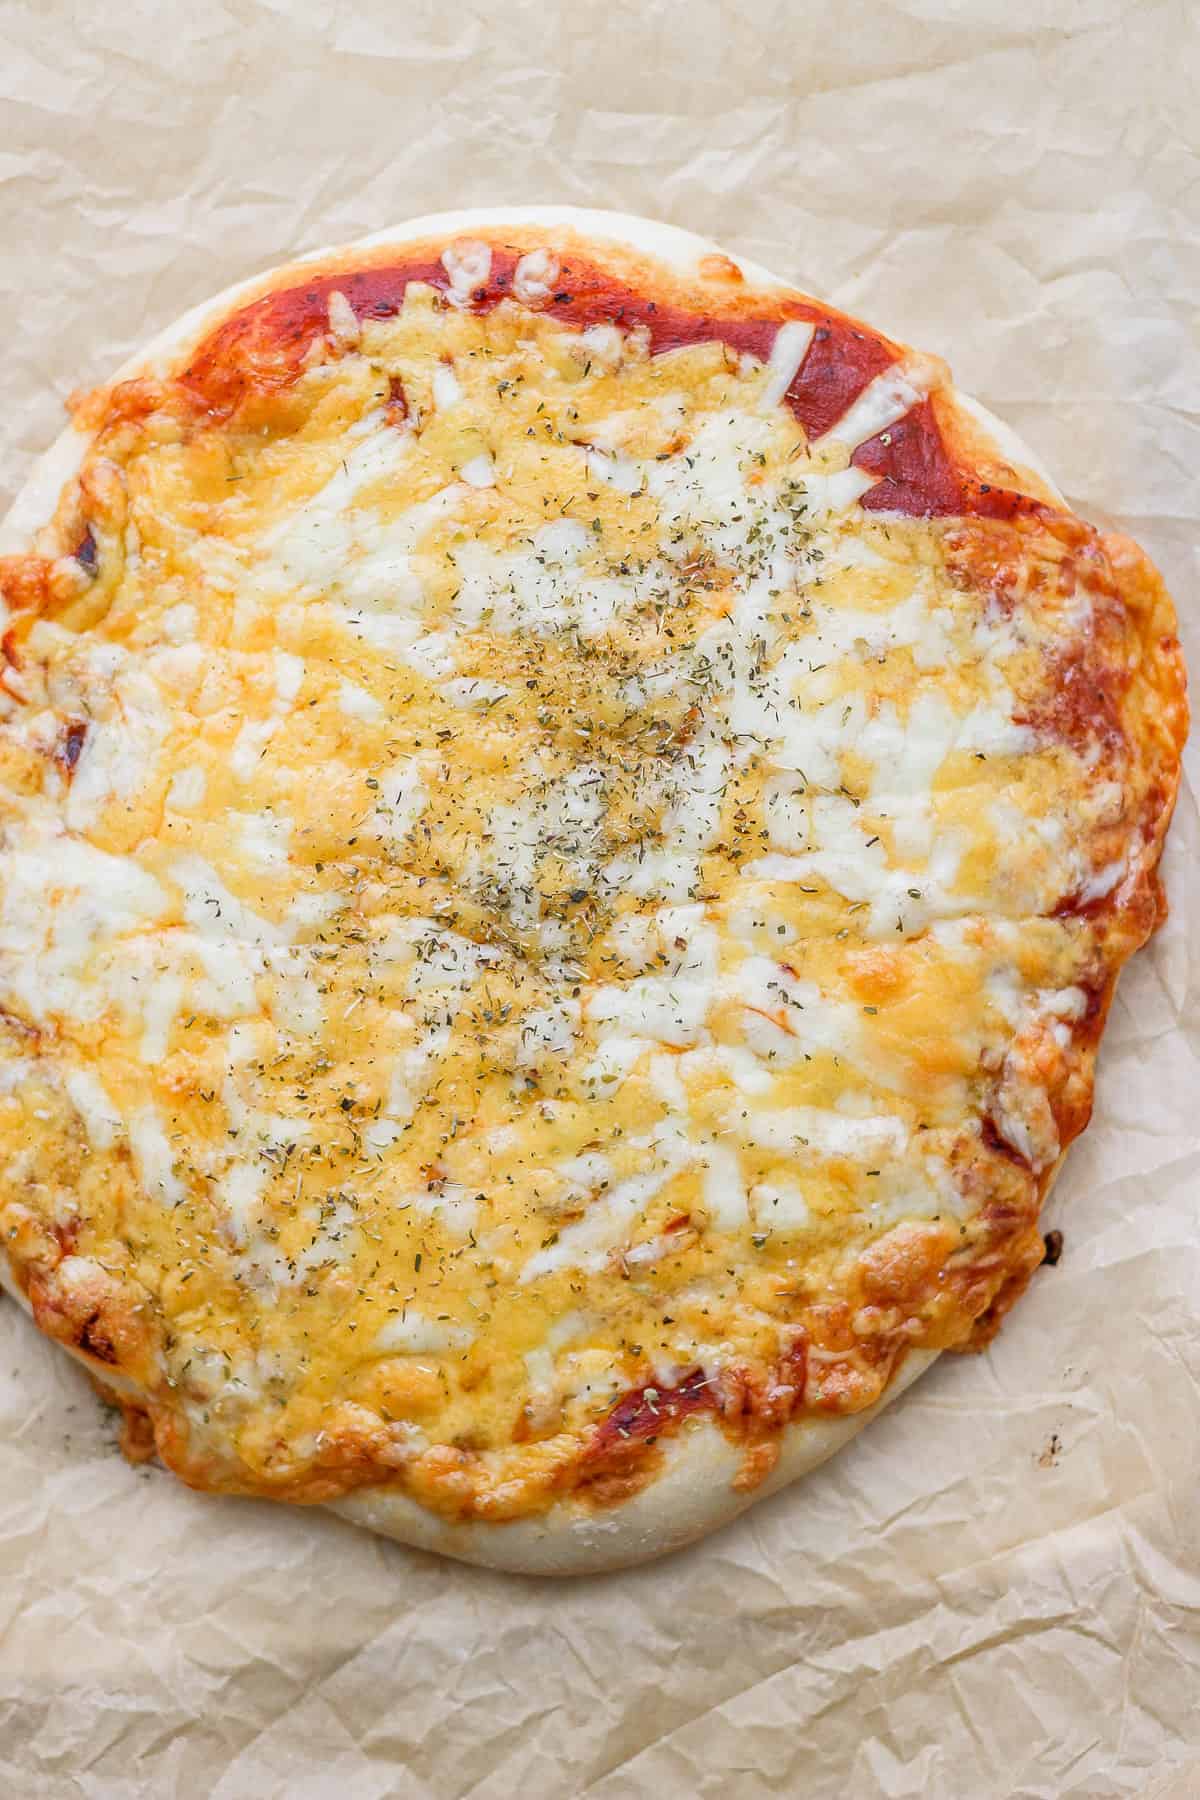 How to Make Pizza Dough {Easy Vegan Recipe} - FeelGoodFoodie